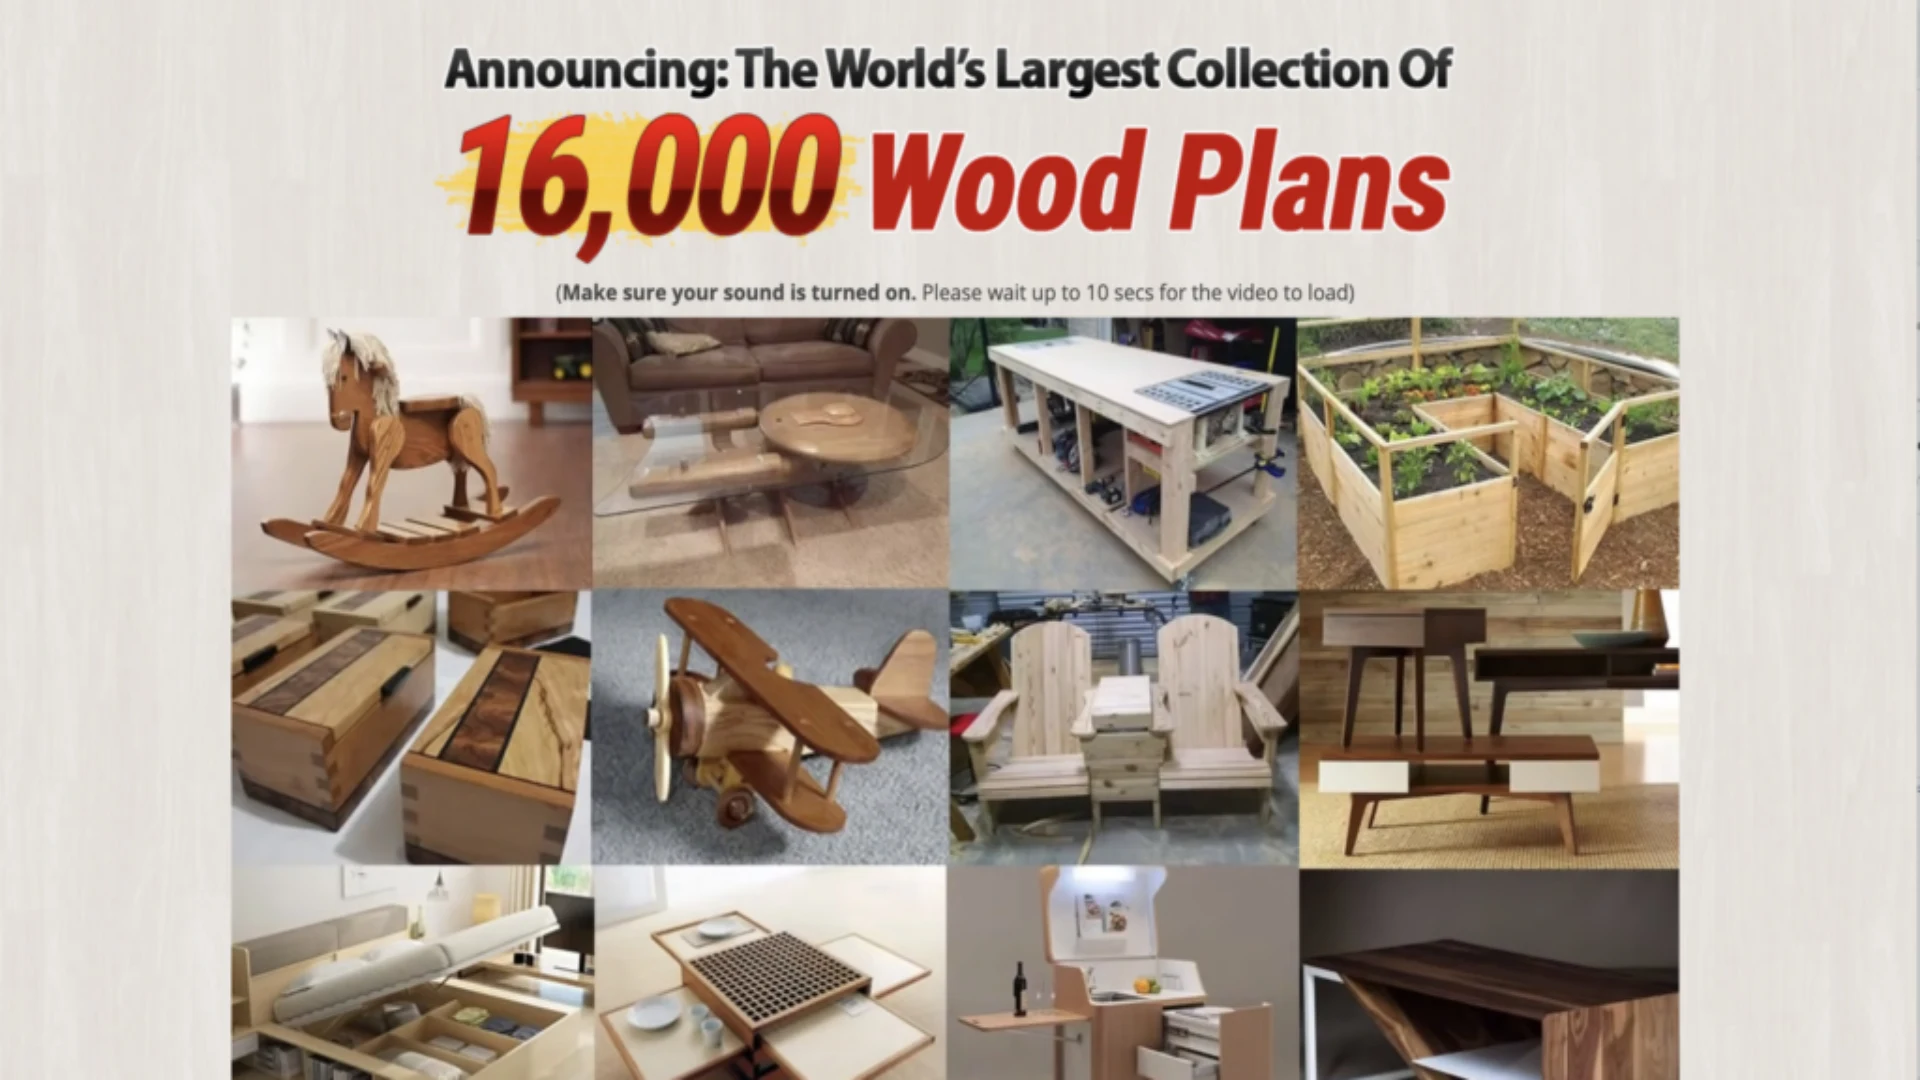 The #1 Woodworking Resource With Over 16,000 Plans One-Stop Portal for a Lifetime